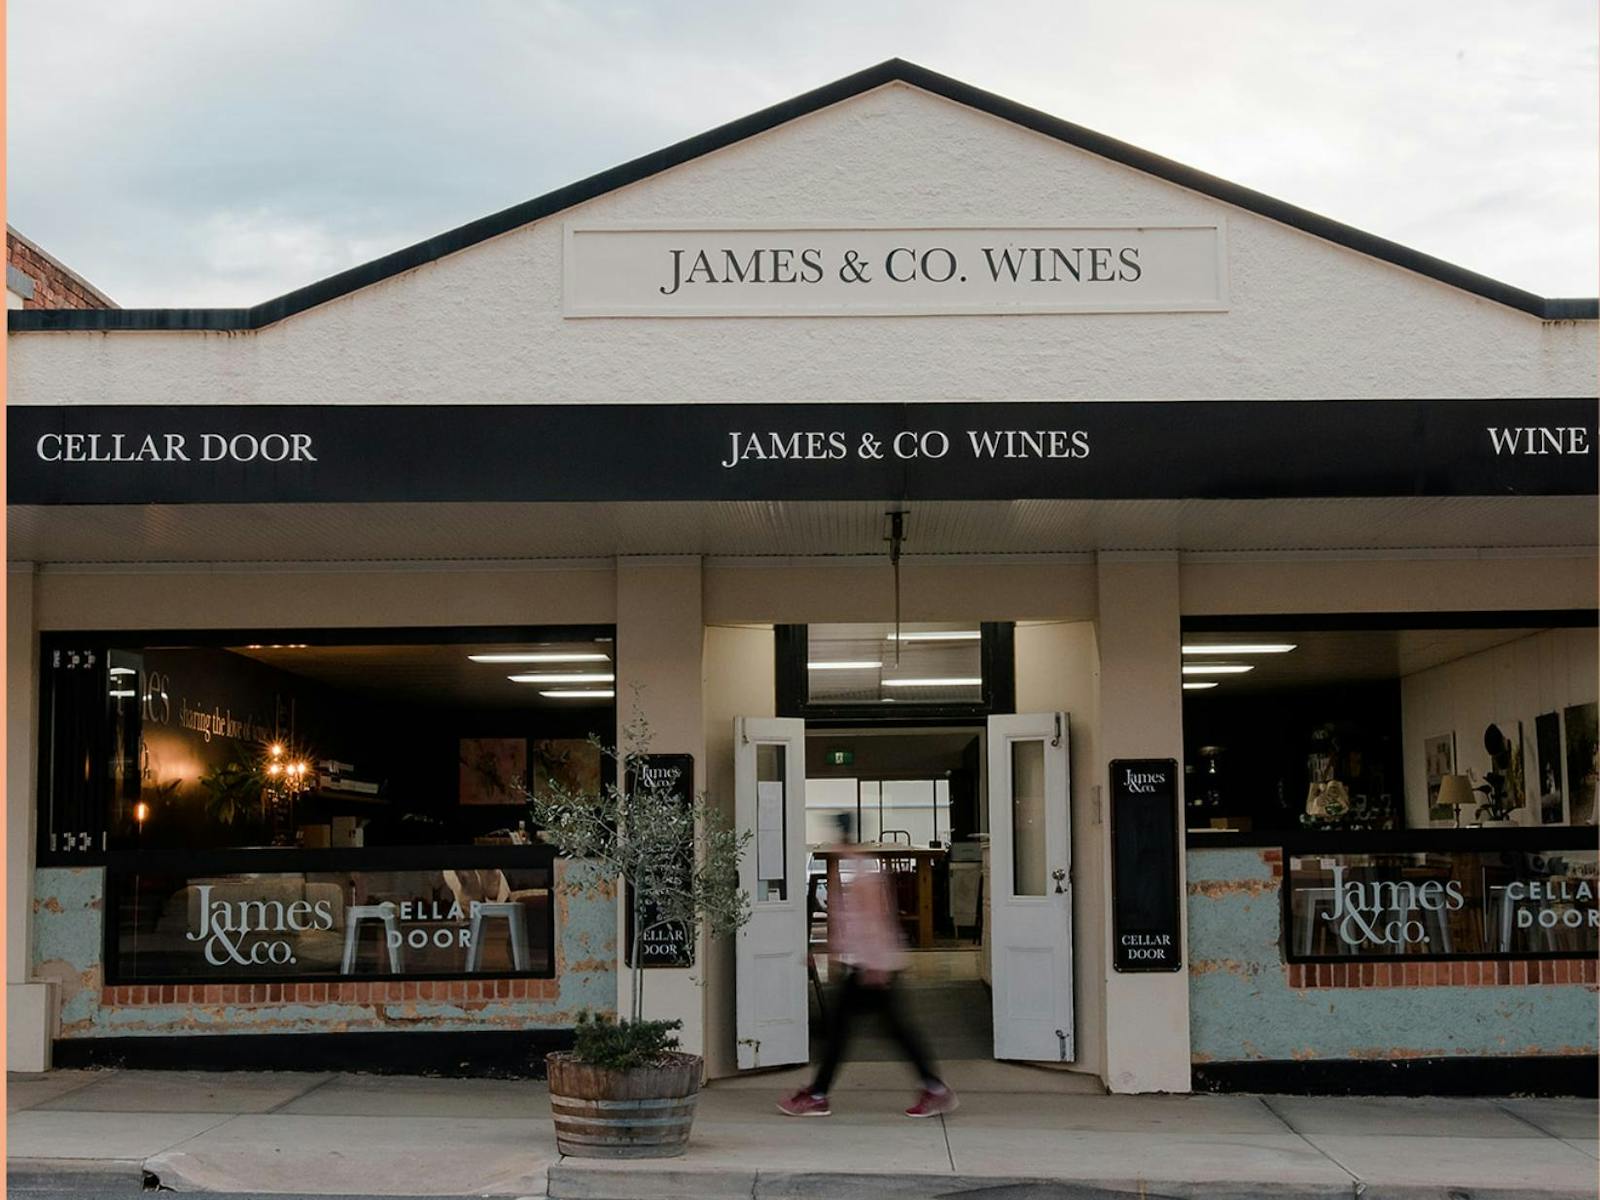 Find our winery in the heart of the Rutherglen wine village at 136 Main Street